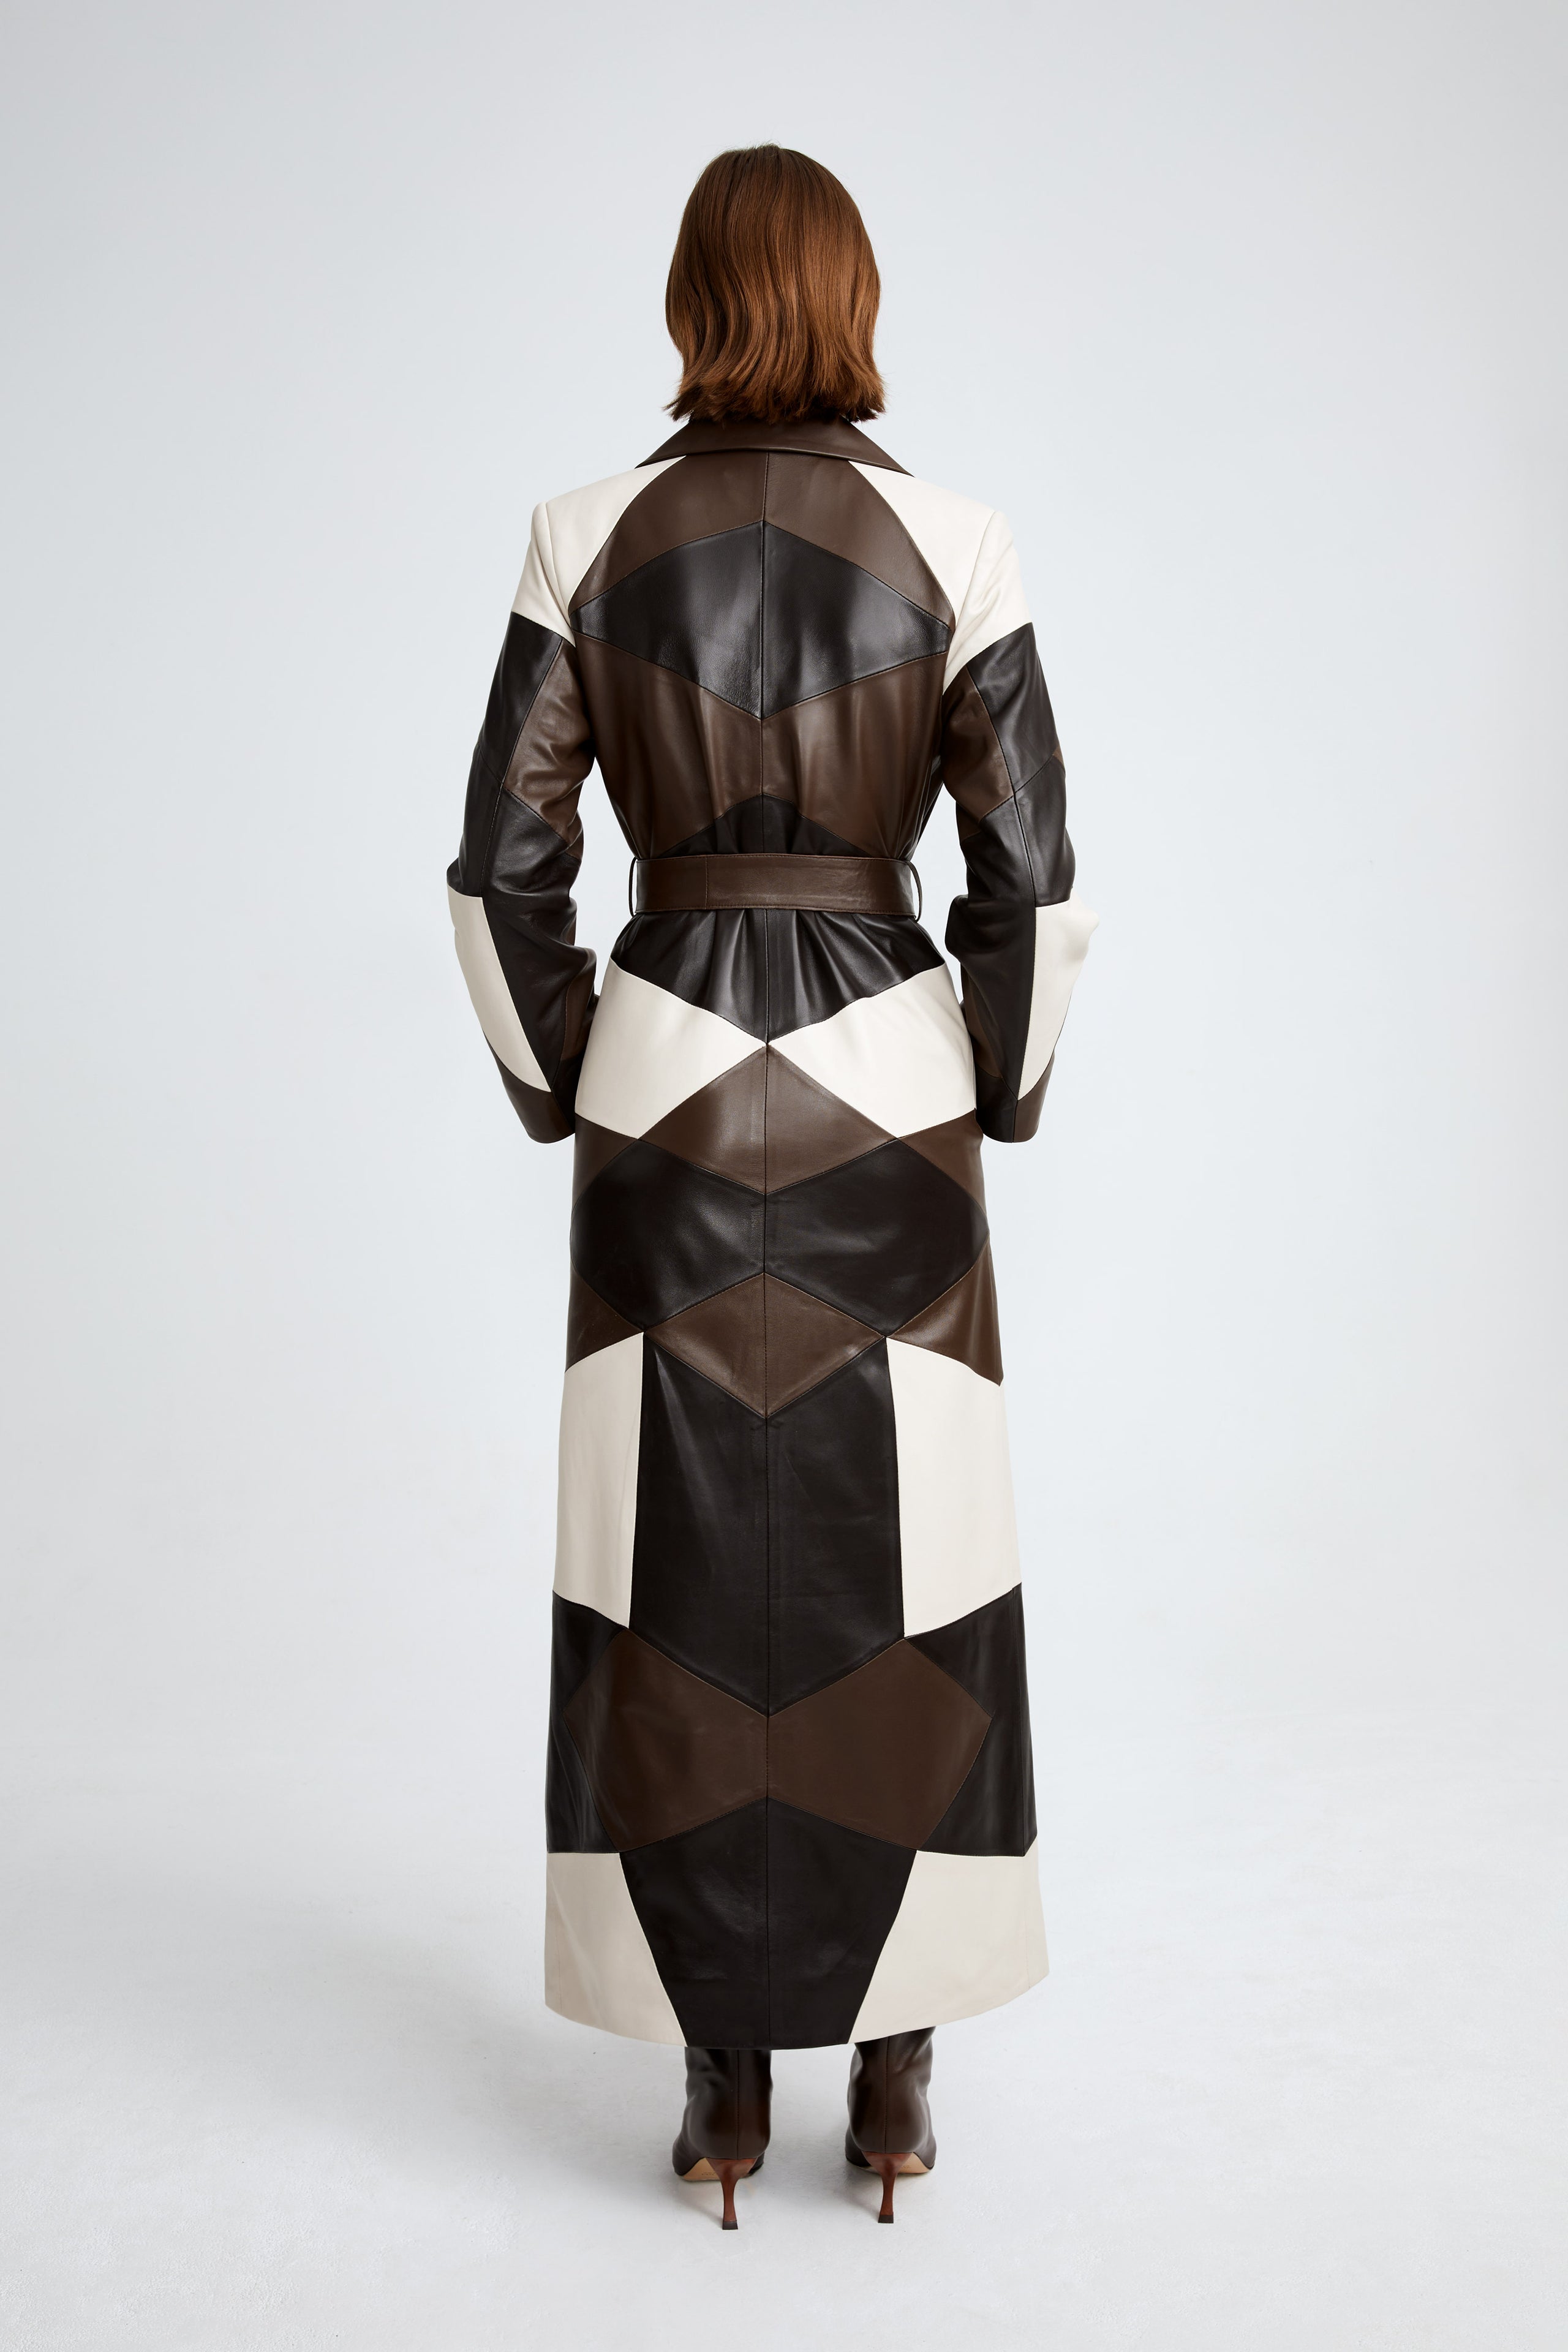 Model is wearing the Sonja Cocoa Vanilla Brown Patchwork Leather Trench Back